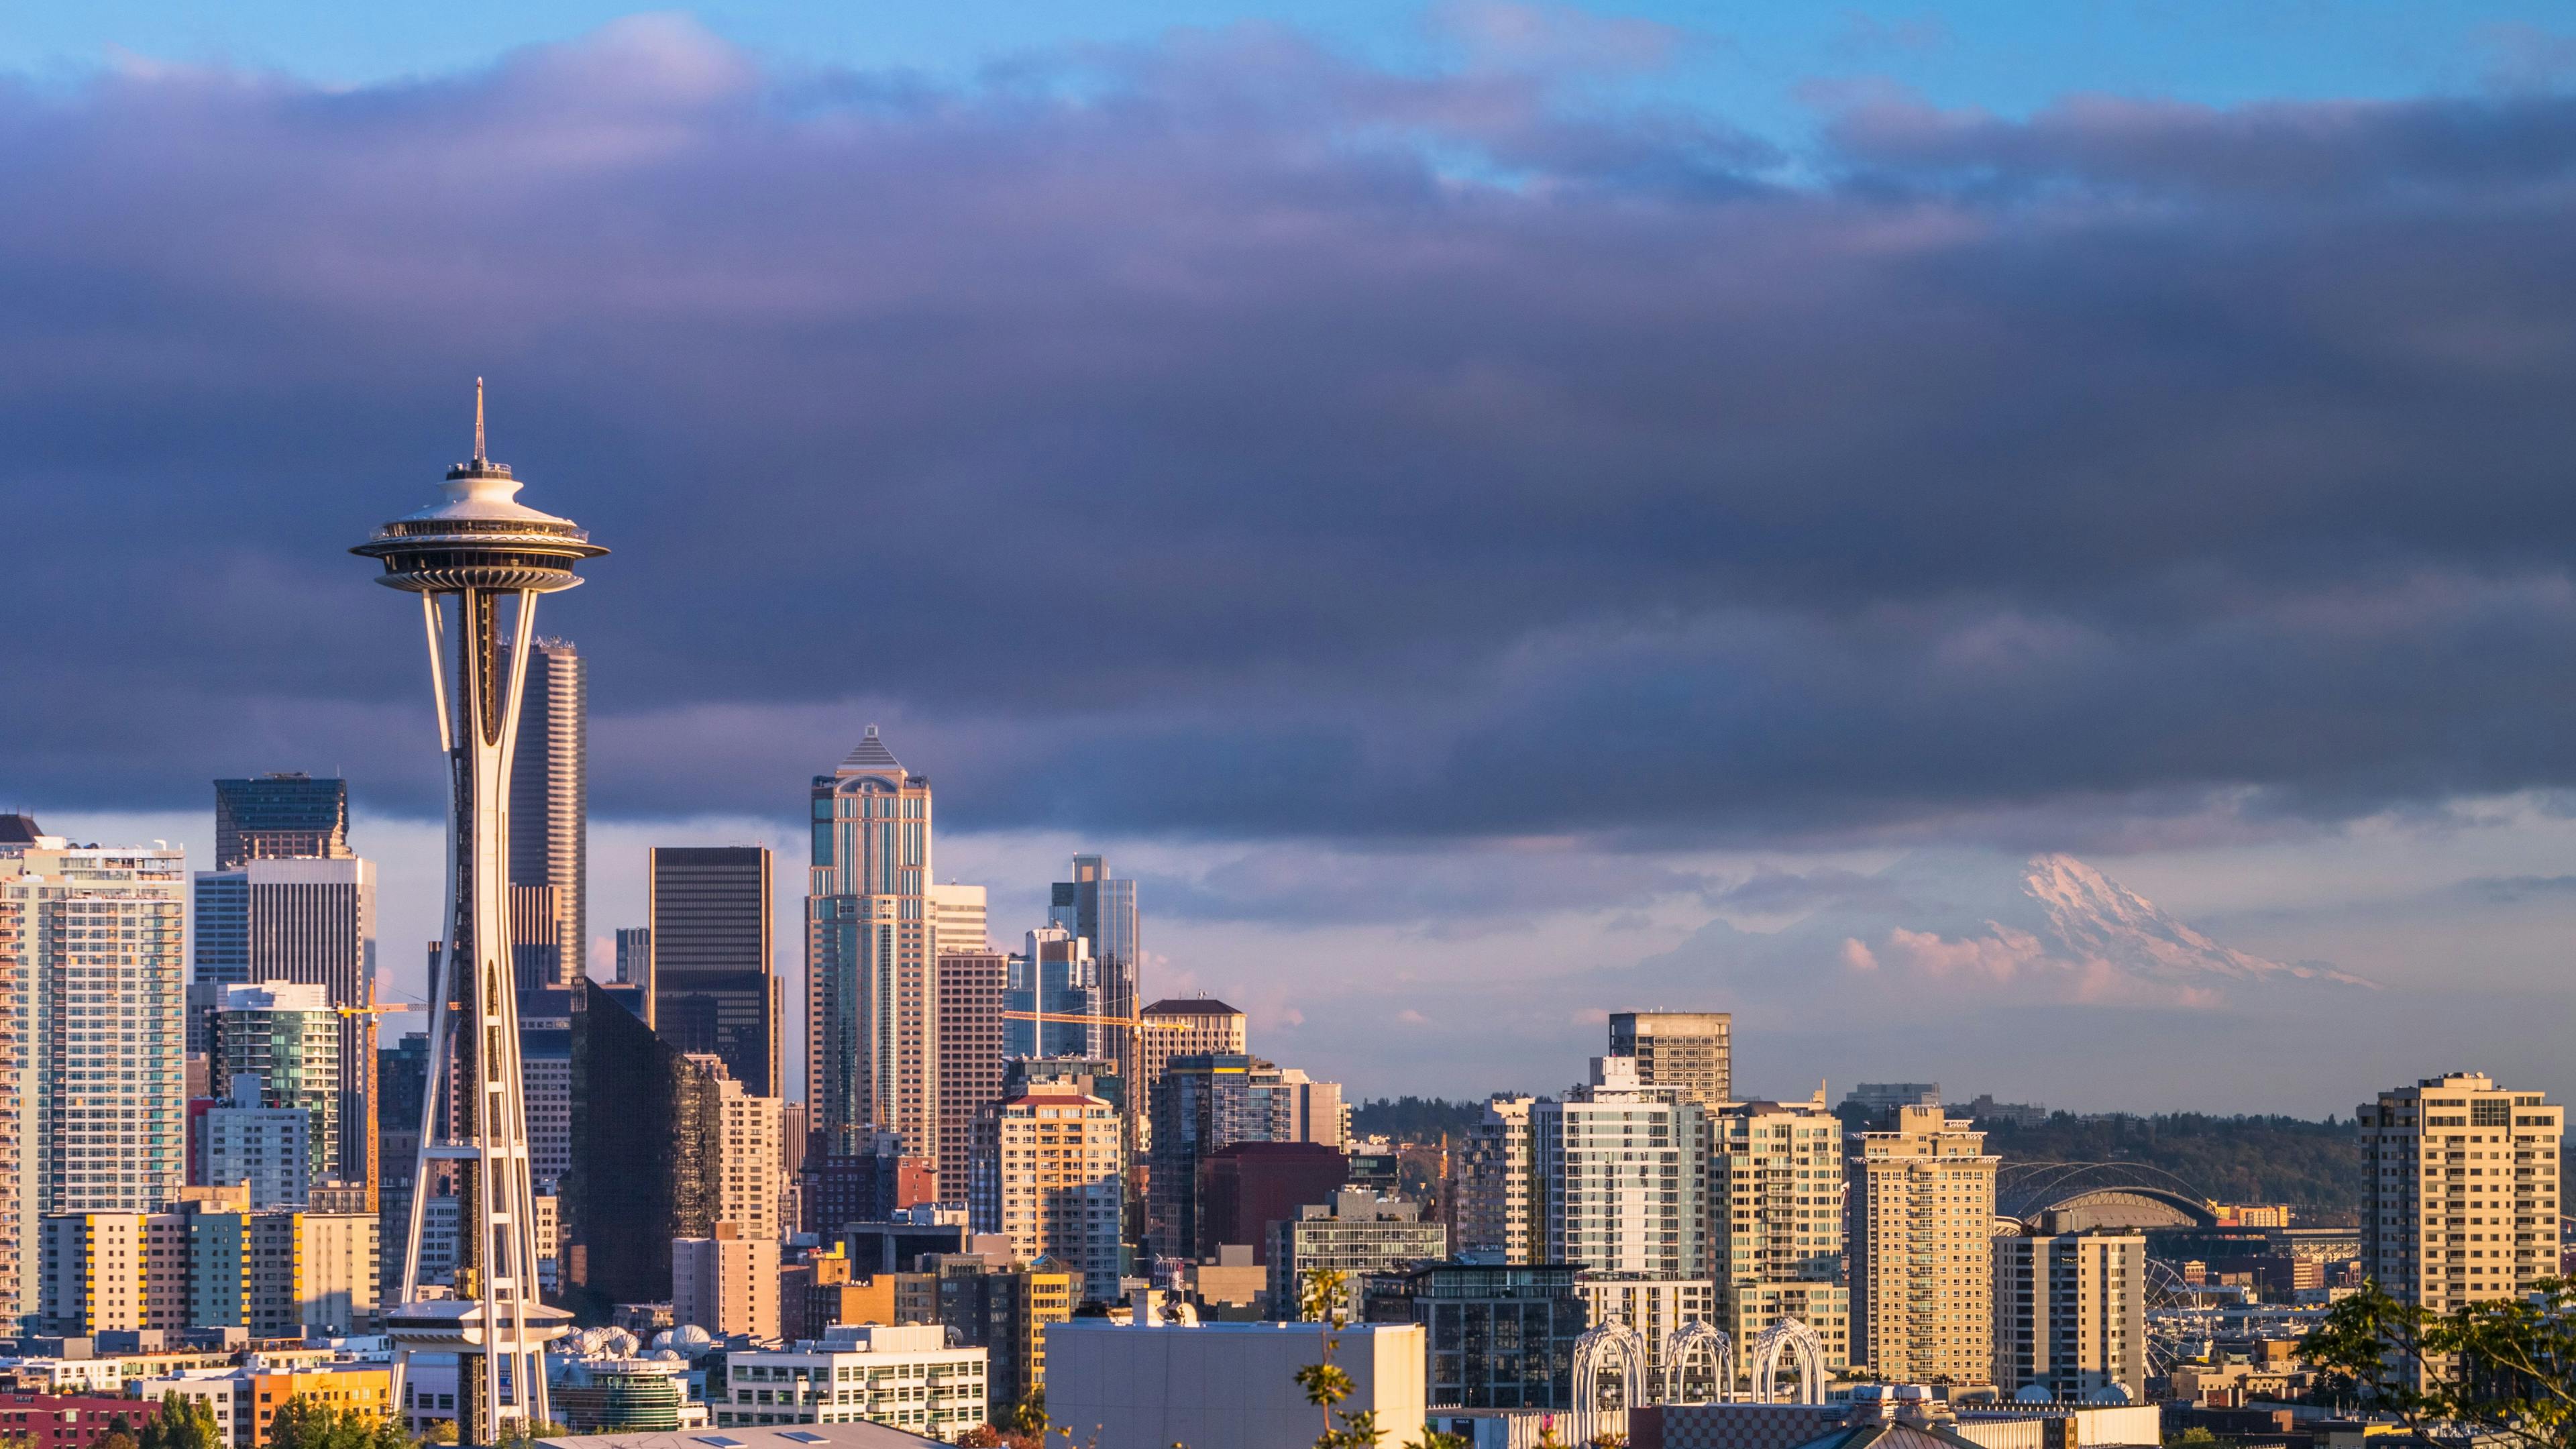 The American Hospital Association Leadership Summit takes place in Seattle. The conference kicks off Sunday and runs through Tuesday. (Image credit: ©kalafoto - stock.adobe.com)